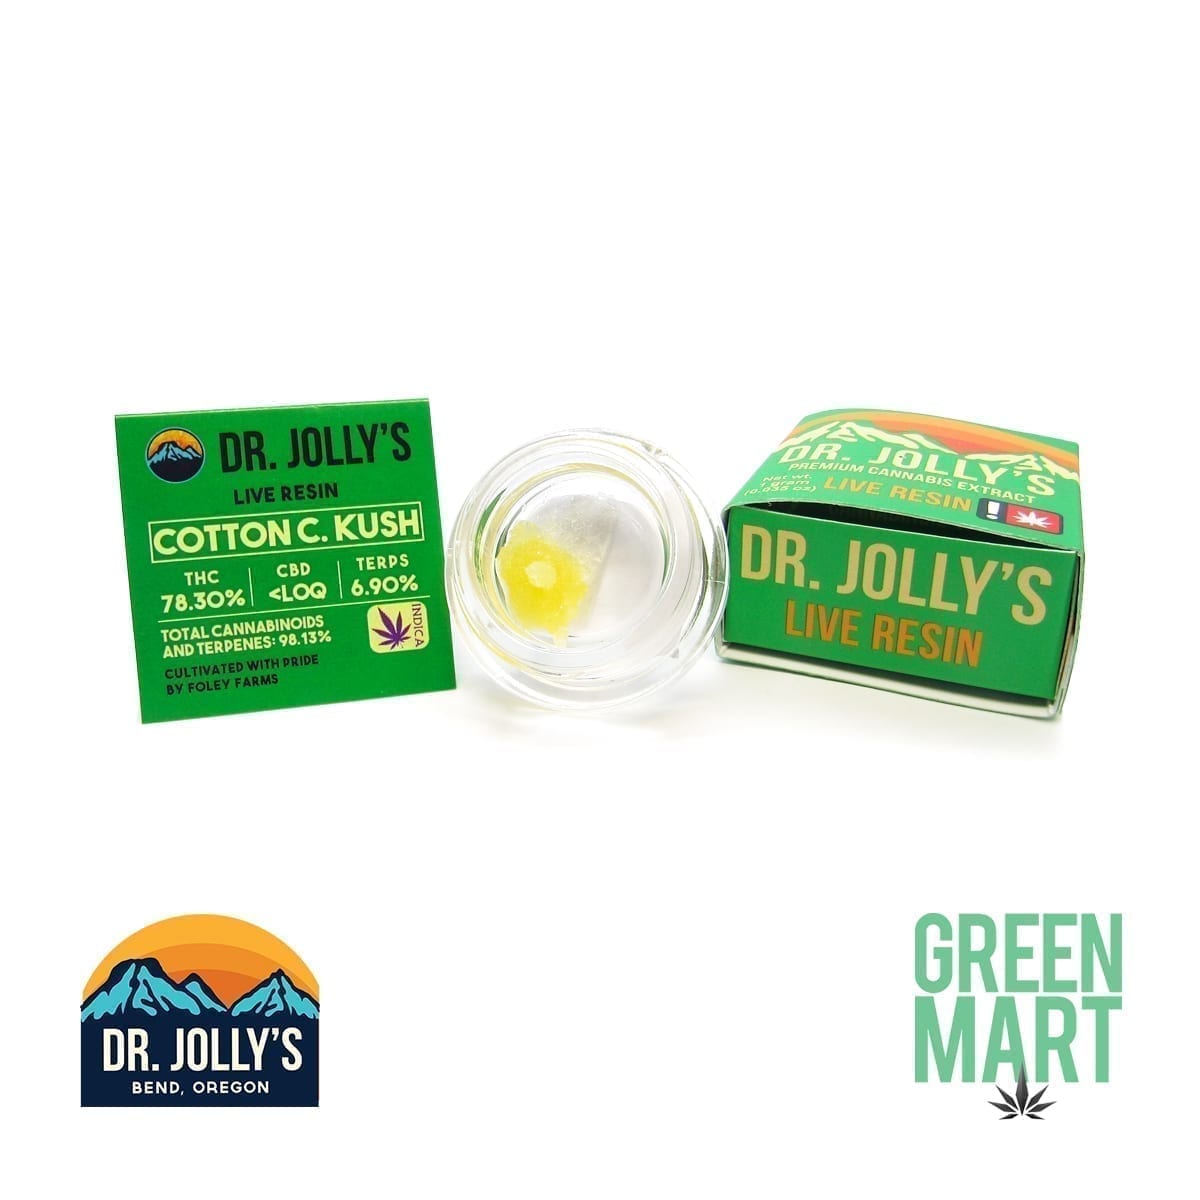 Dr. Jolly's Extracts - Cotton C. Kush Live Resin